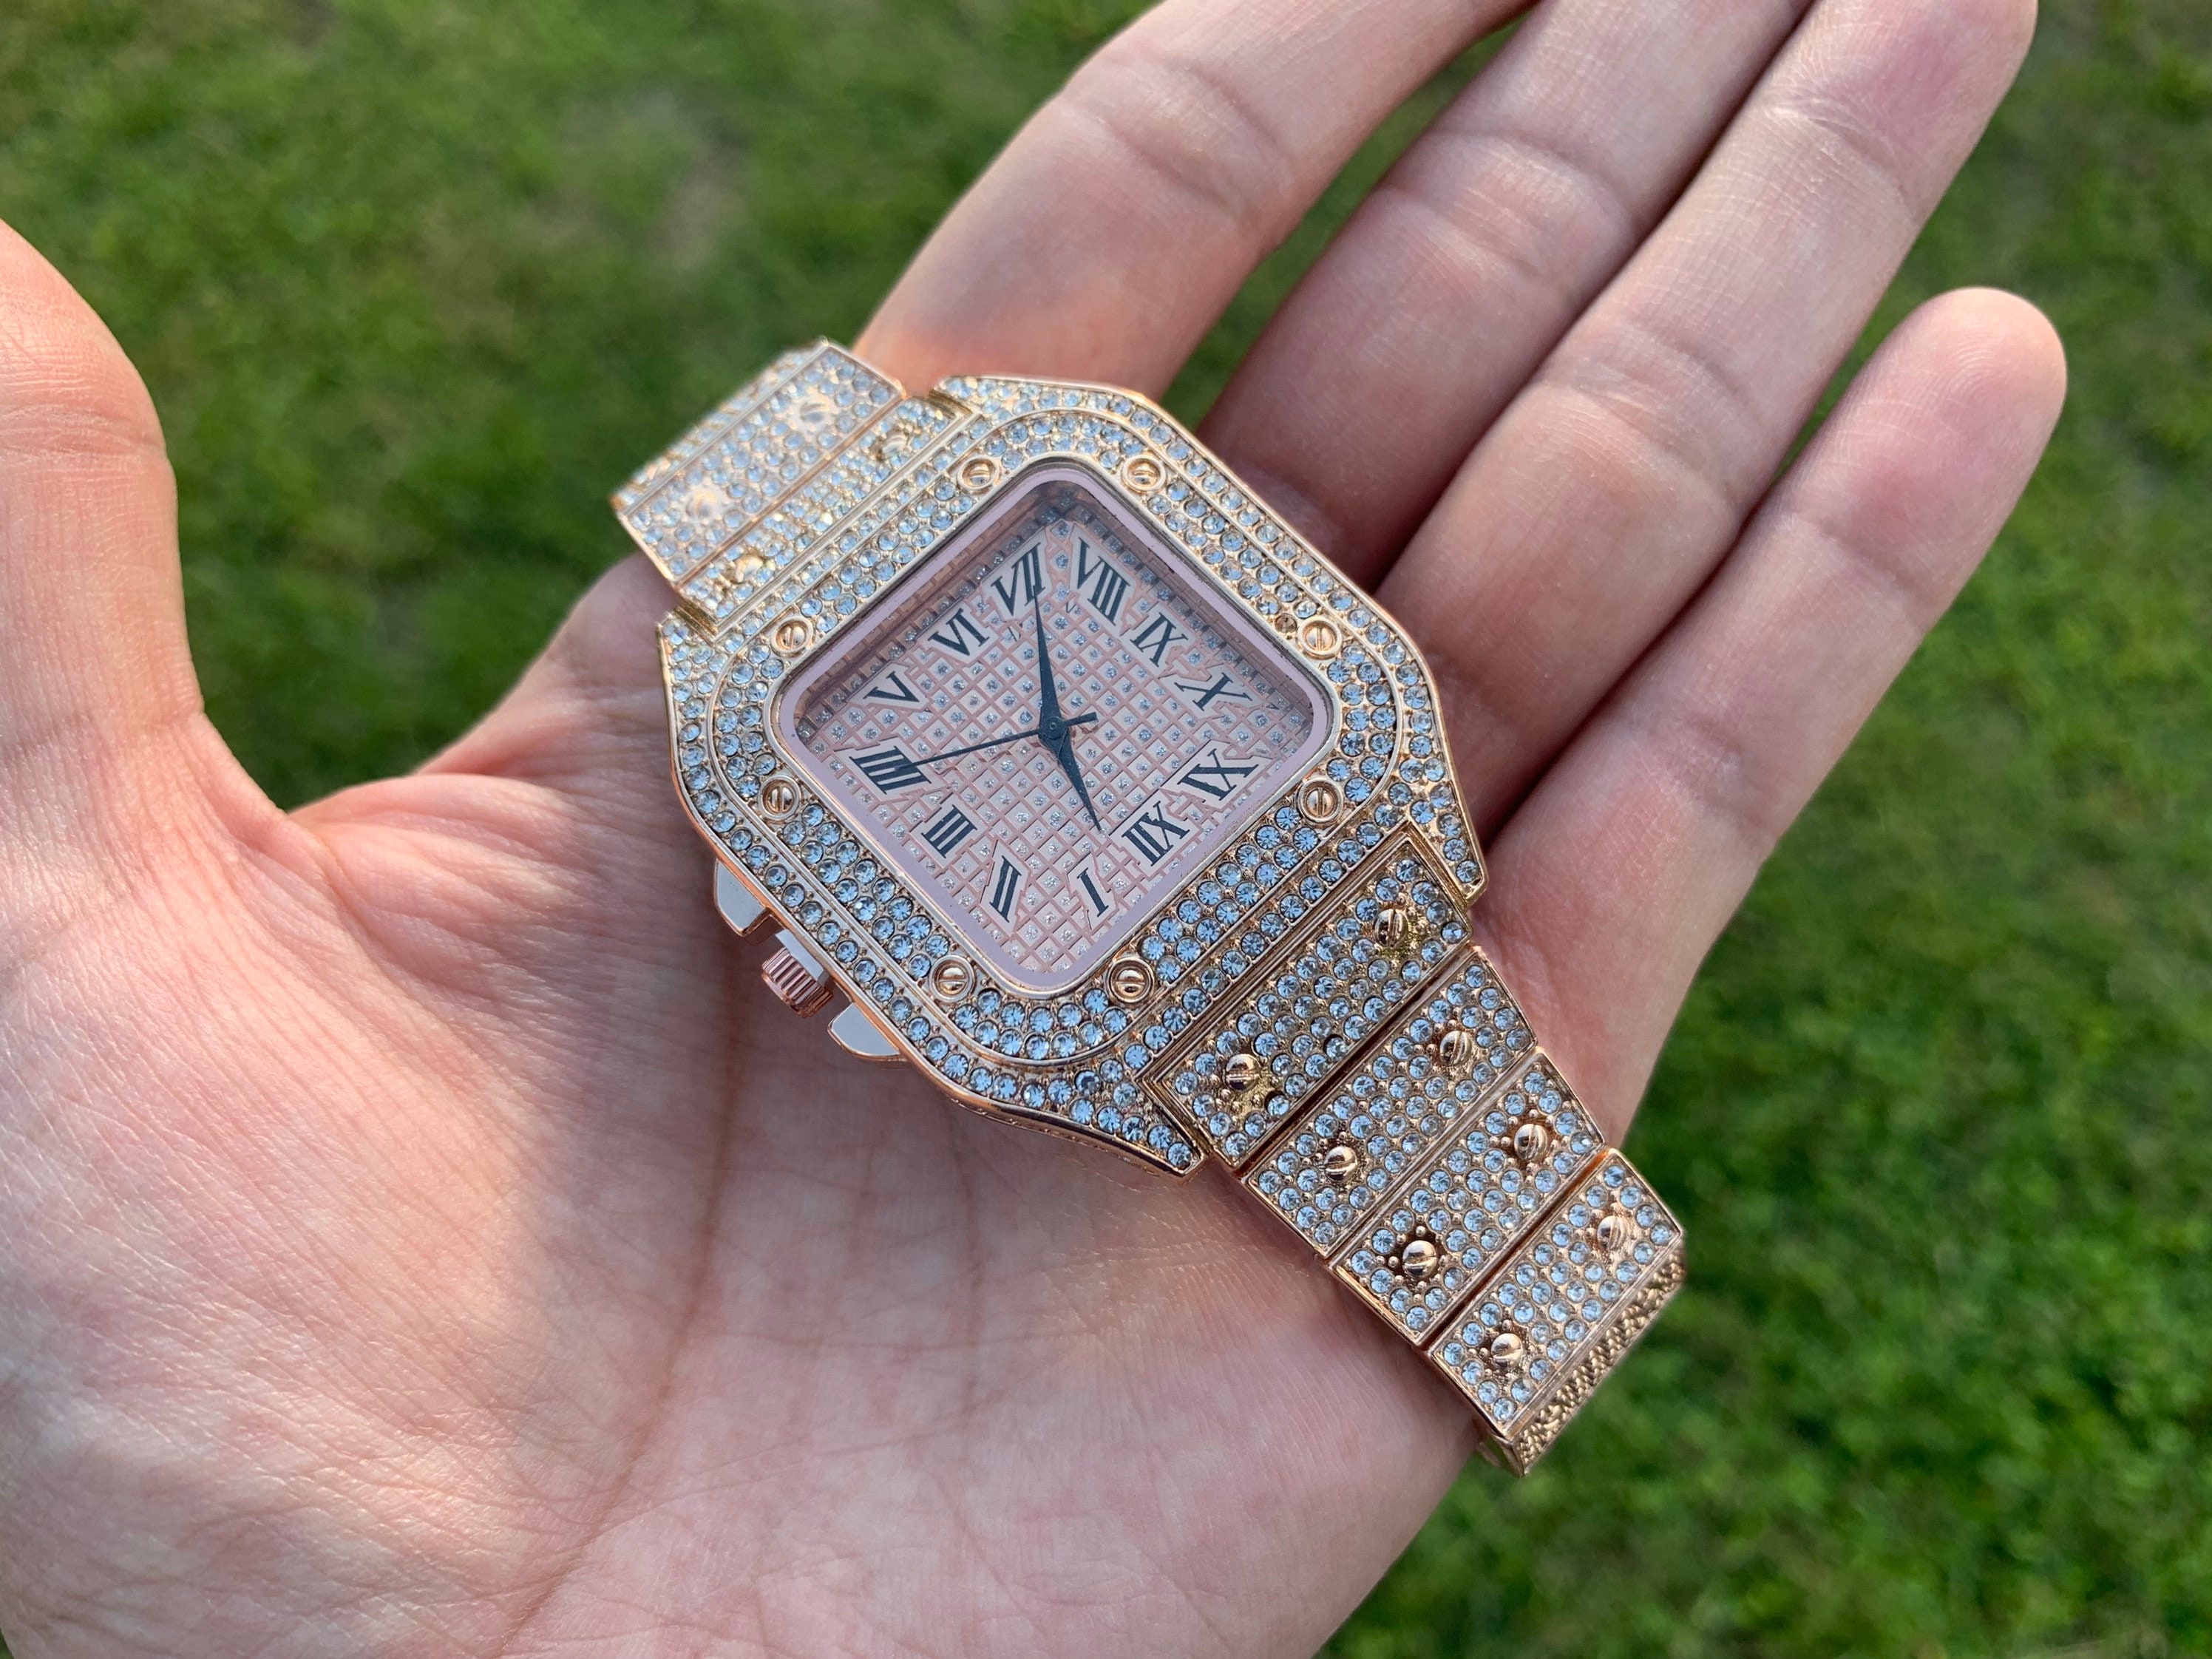 14k Rose Gold Plated Iced Out Watch Men Women Flooded Premium Watch Gift  Hip Hop -  Canada